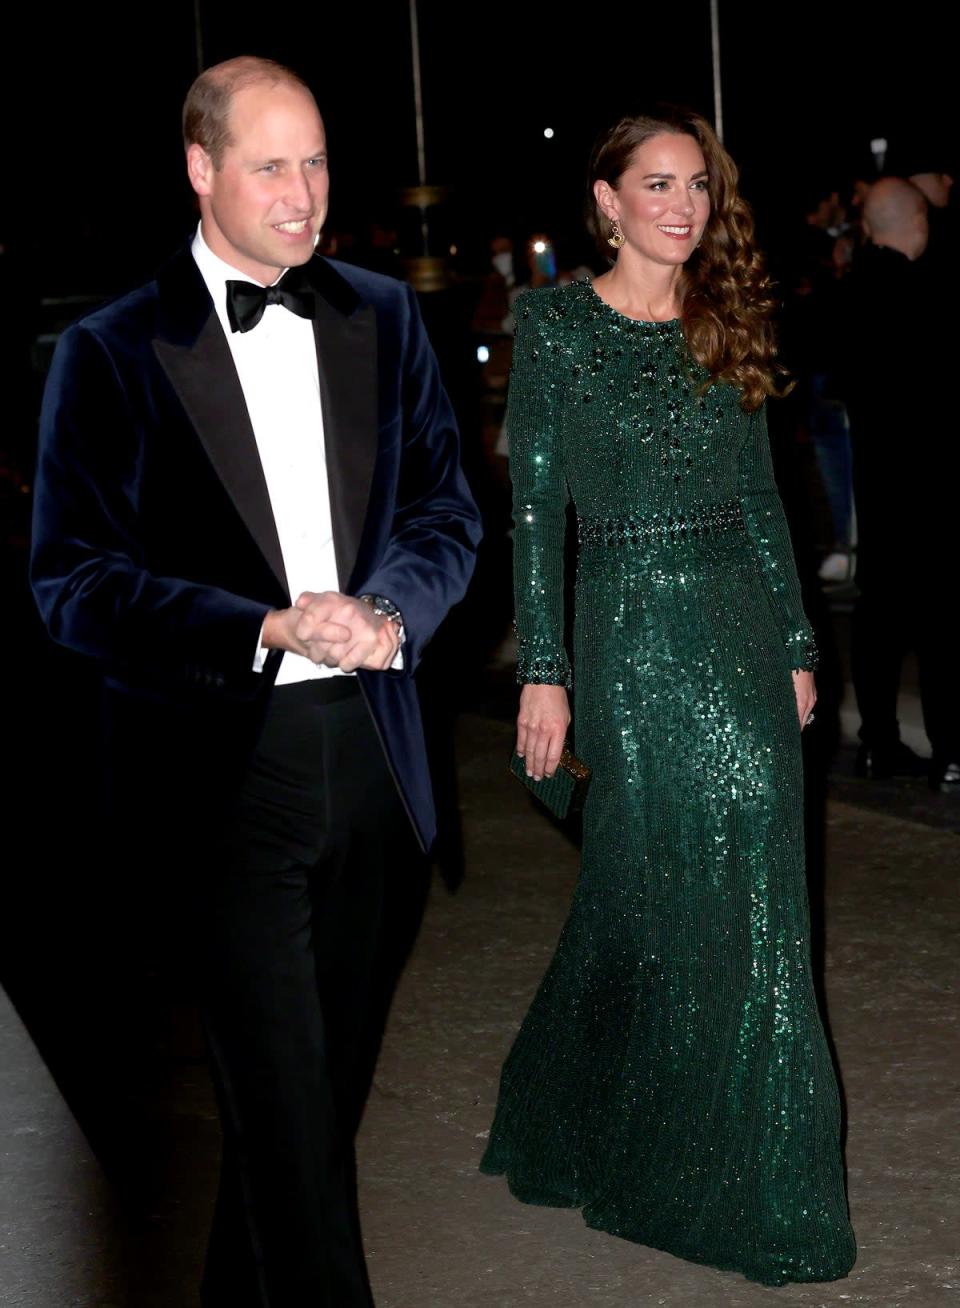 The Duke and Duchess of Cambridge attend the Royal Variety Performance, 2021 (Getty Images)